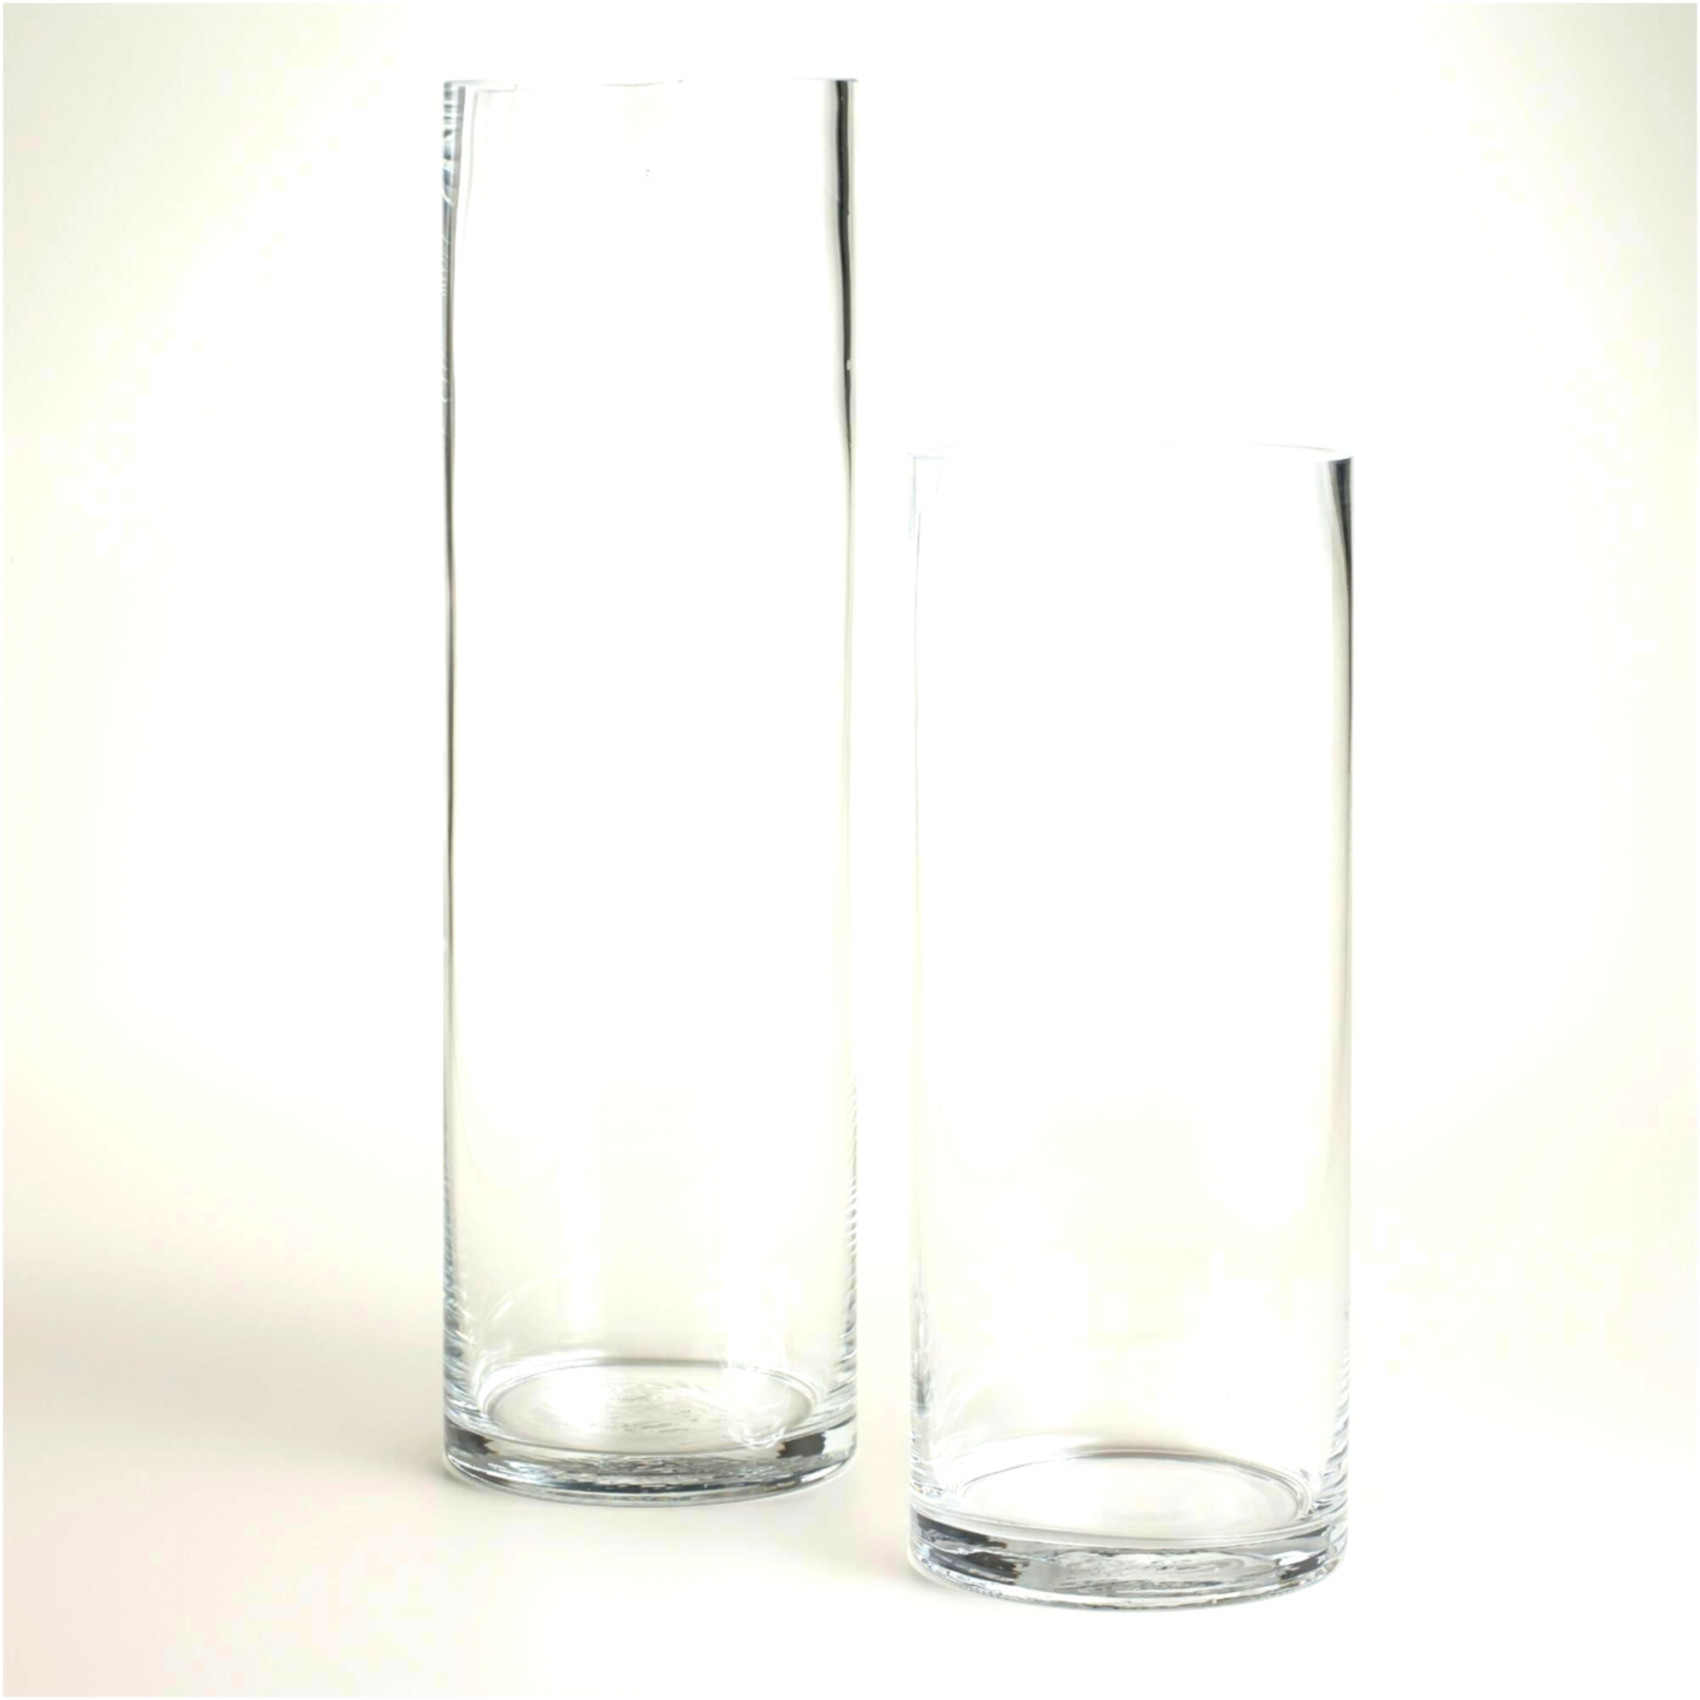 25 Lovely Cheap Glass Cylinder Vases wholesale 2022 free download cheap glass cylinder vases wholesale of why you should not go to glass vases wholesale glass vases throughout crystal glass vases wholesale inspirational 30 elegant vases with